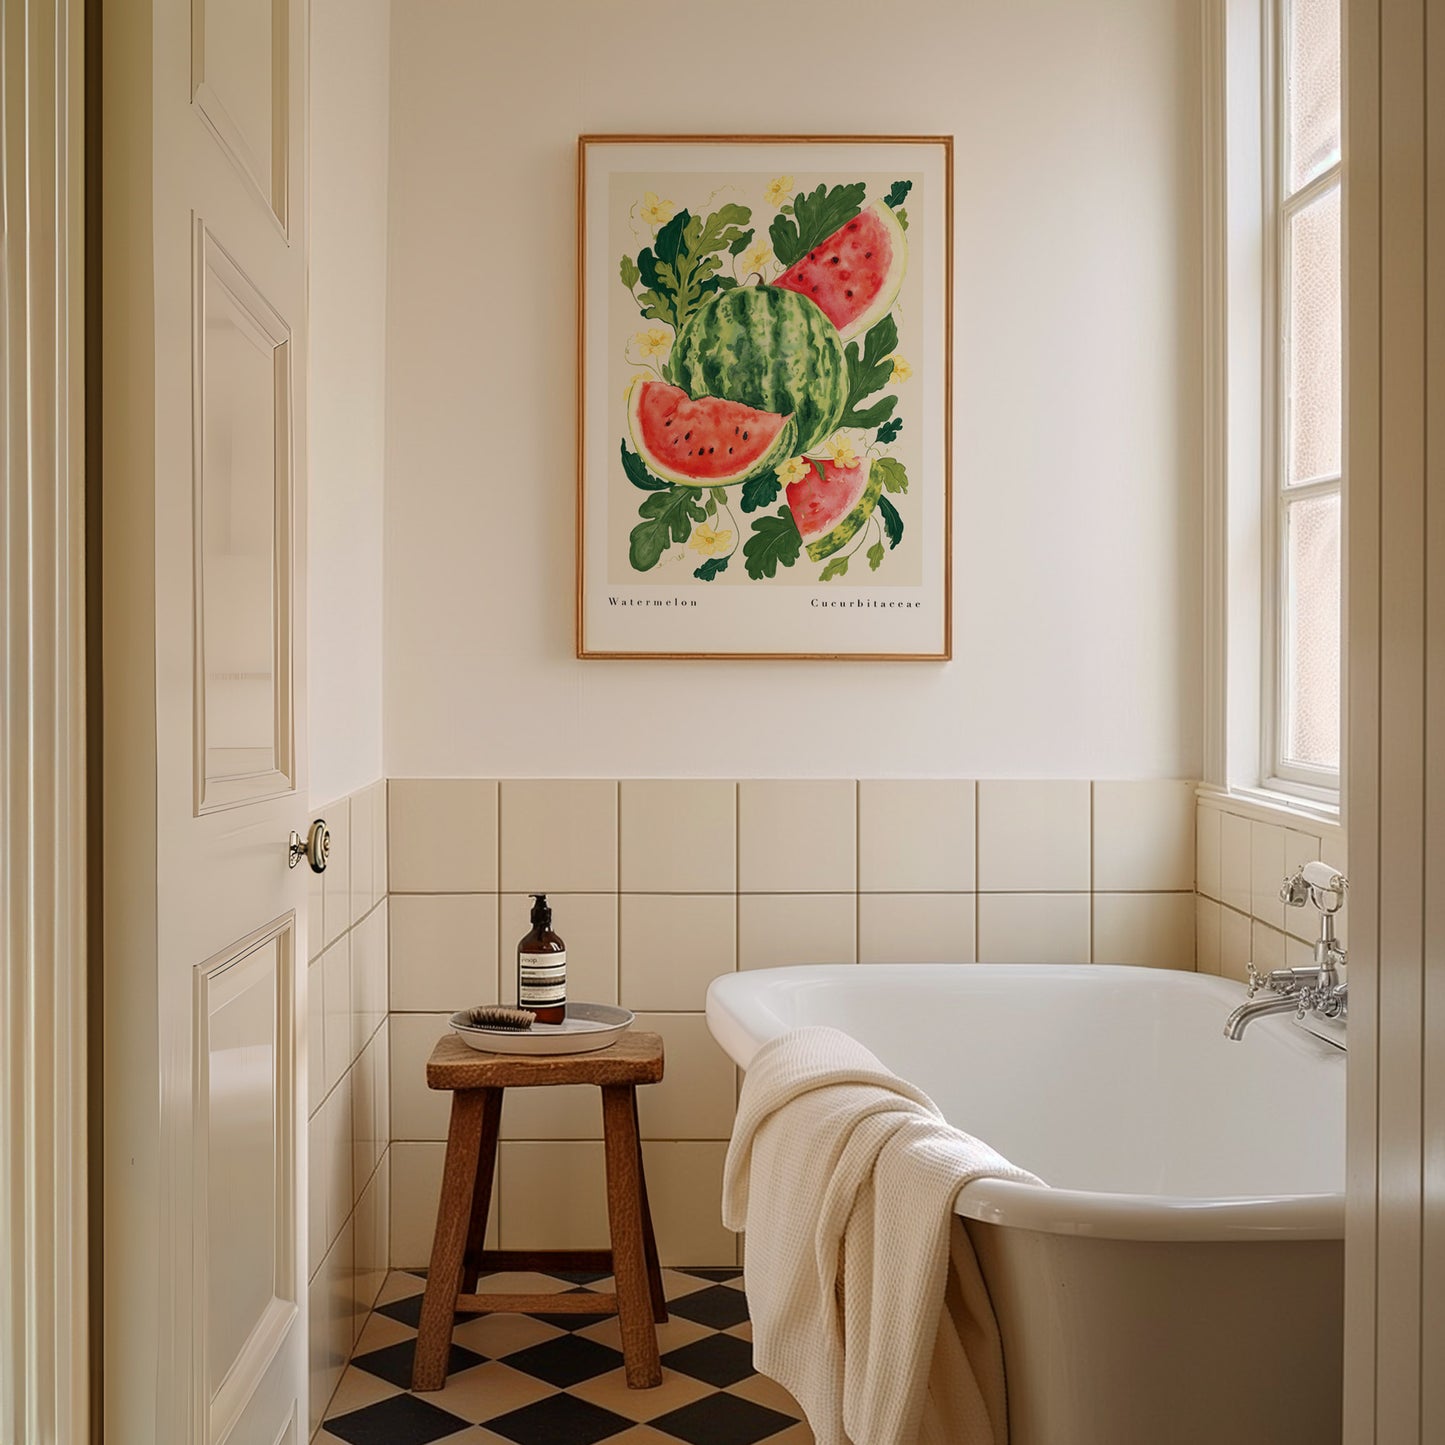 Watermelon art print styled large in bathroom.  Juicy pop of colour and sweetness to brighten up a neutral room